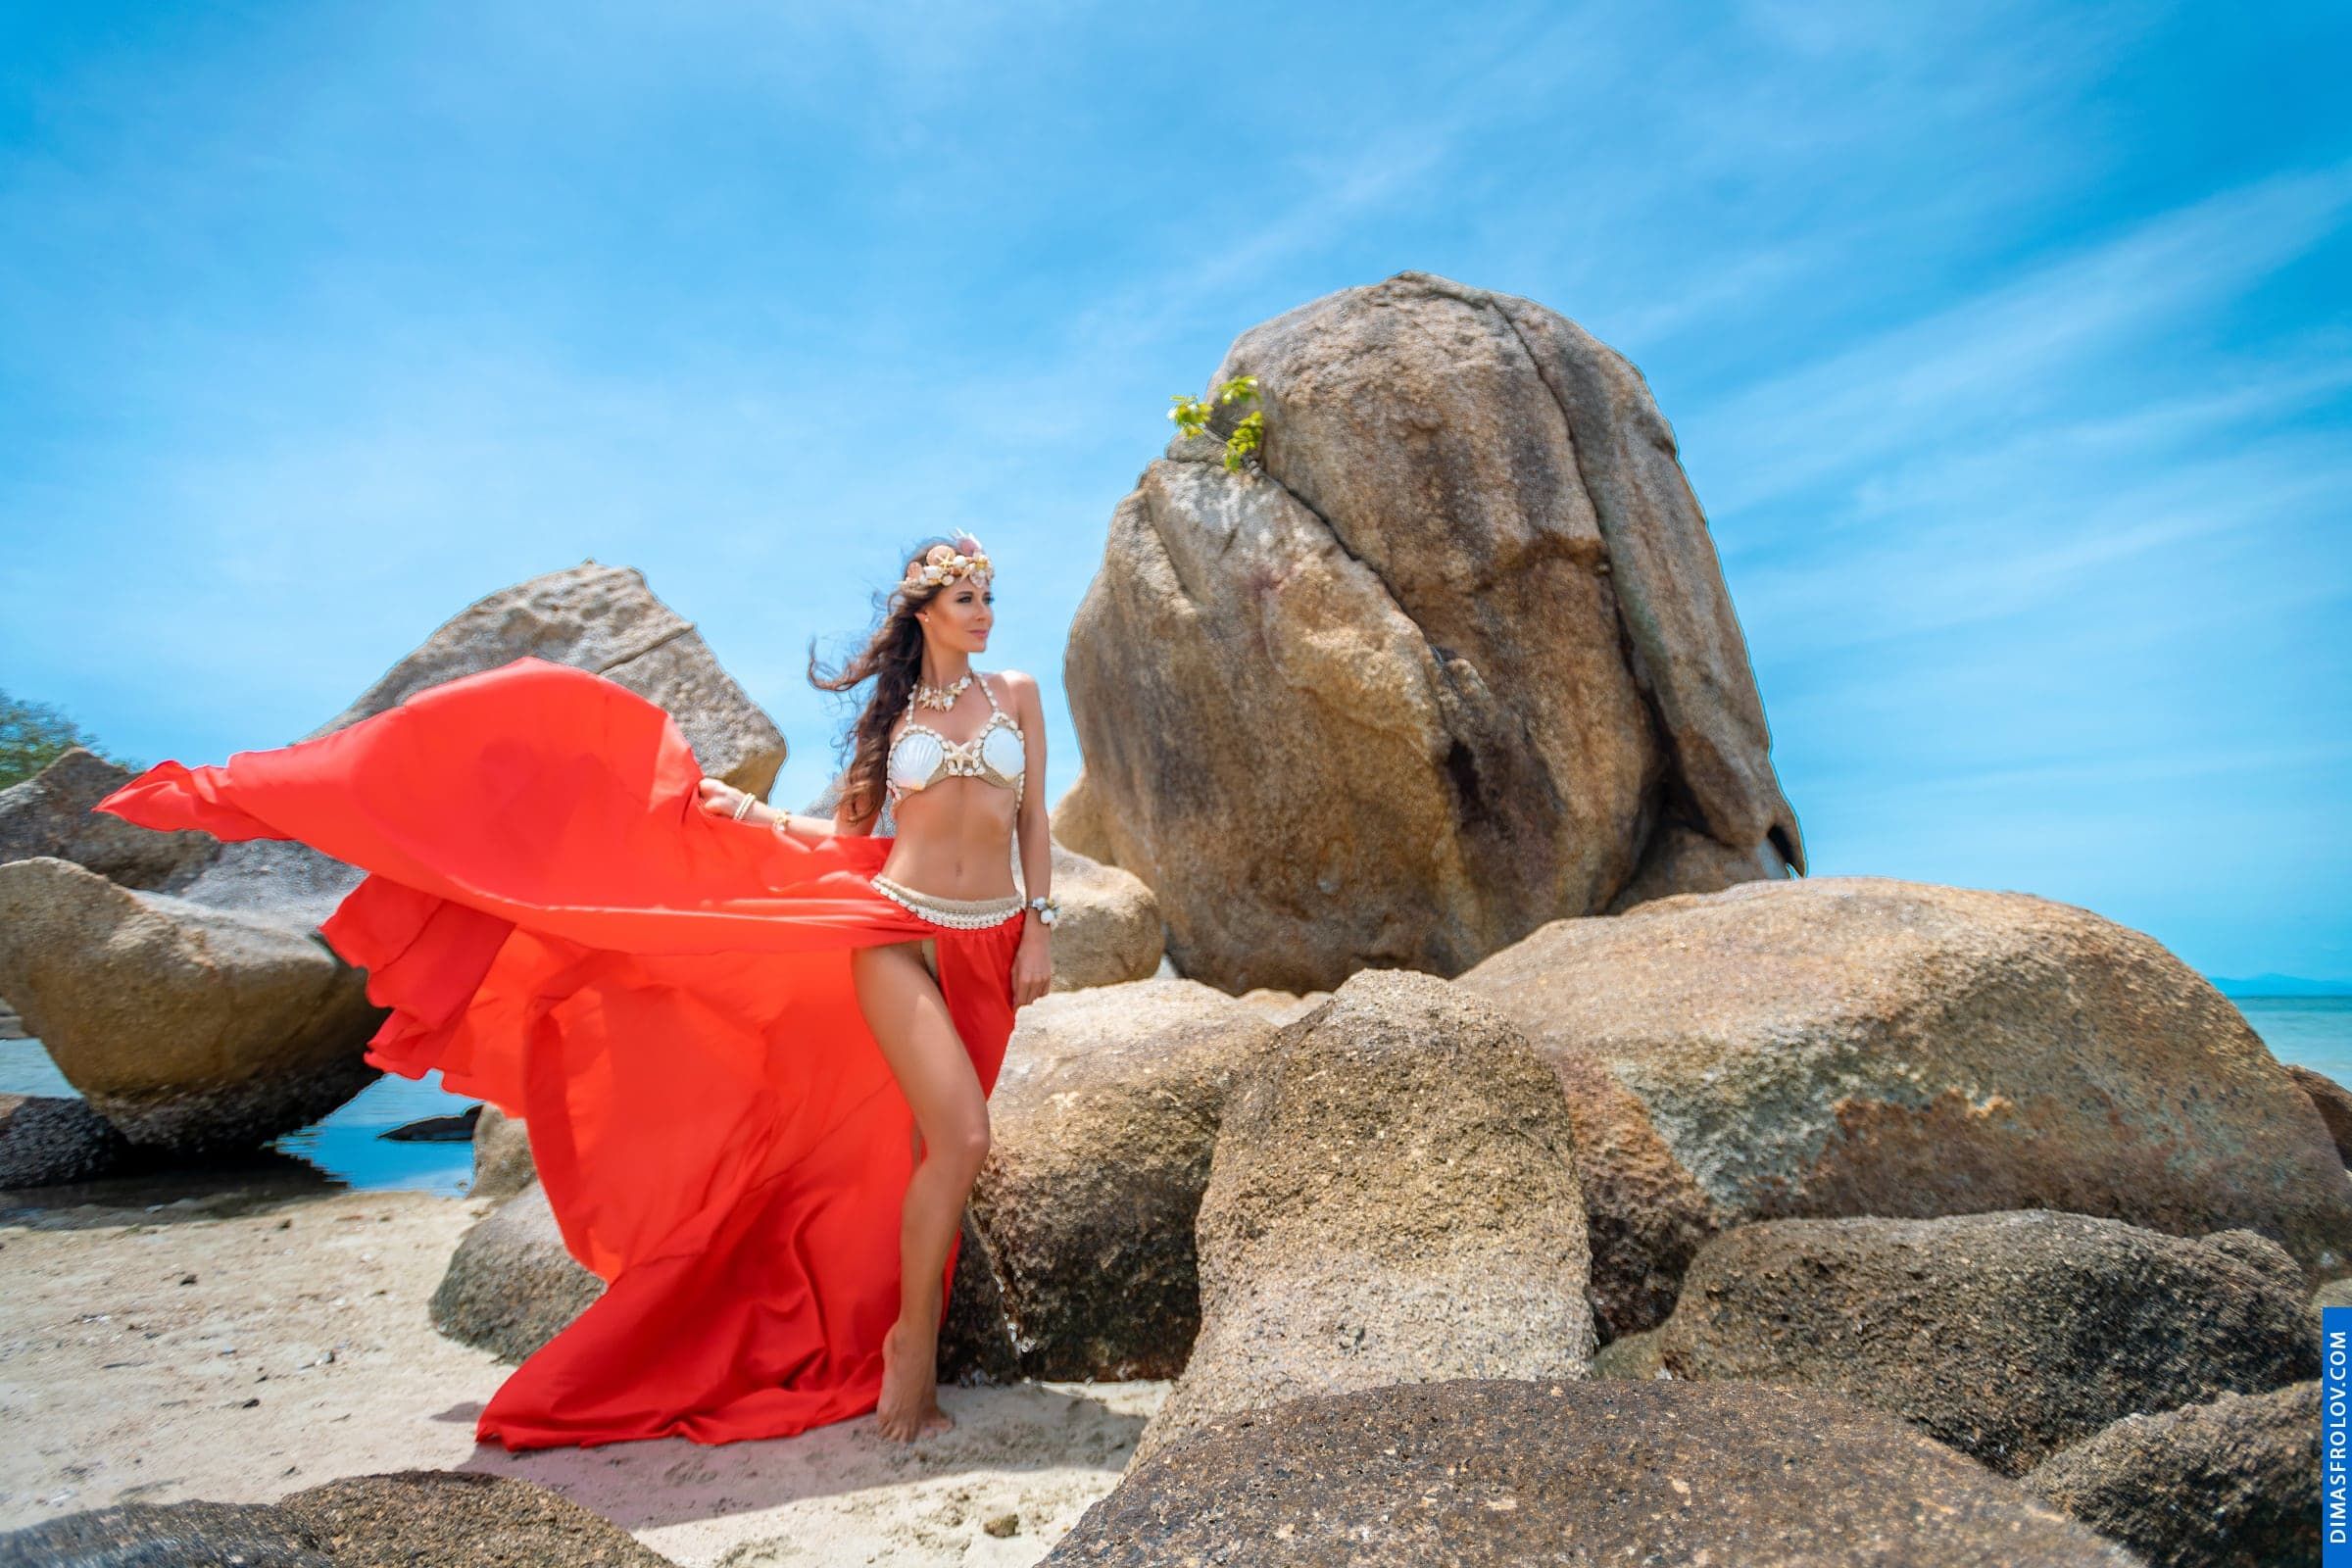 Unique shell accessories for a themed photo shoot on Koh Samui. photographer Dimas Frolov. photo1643